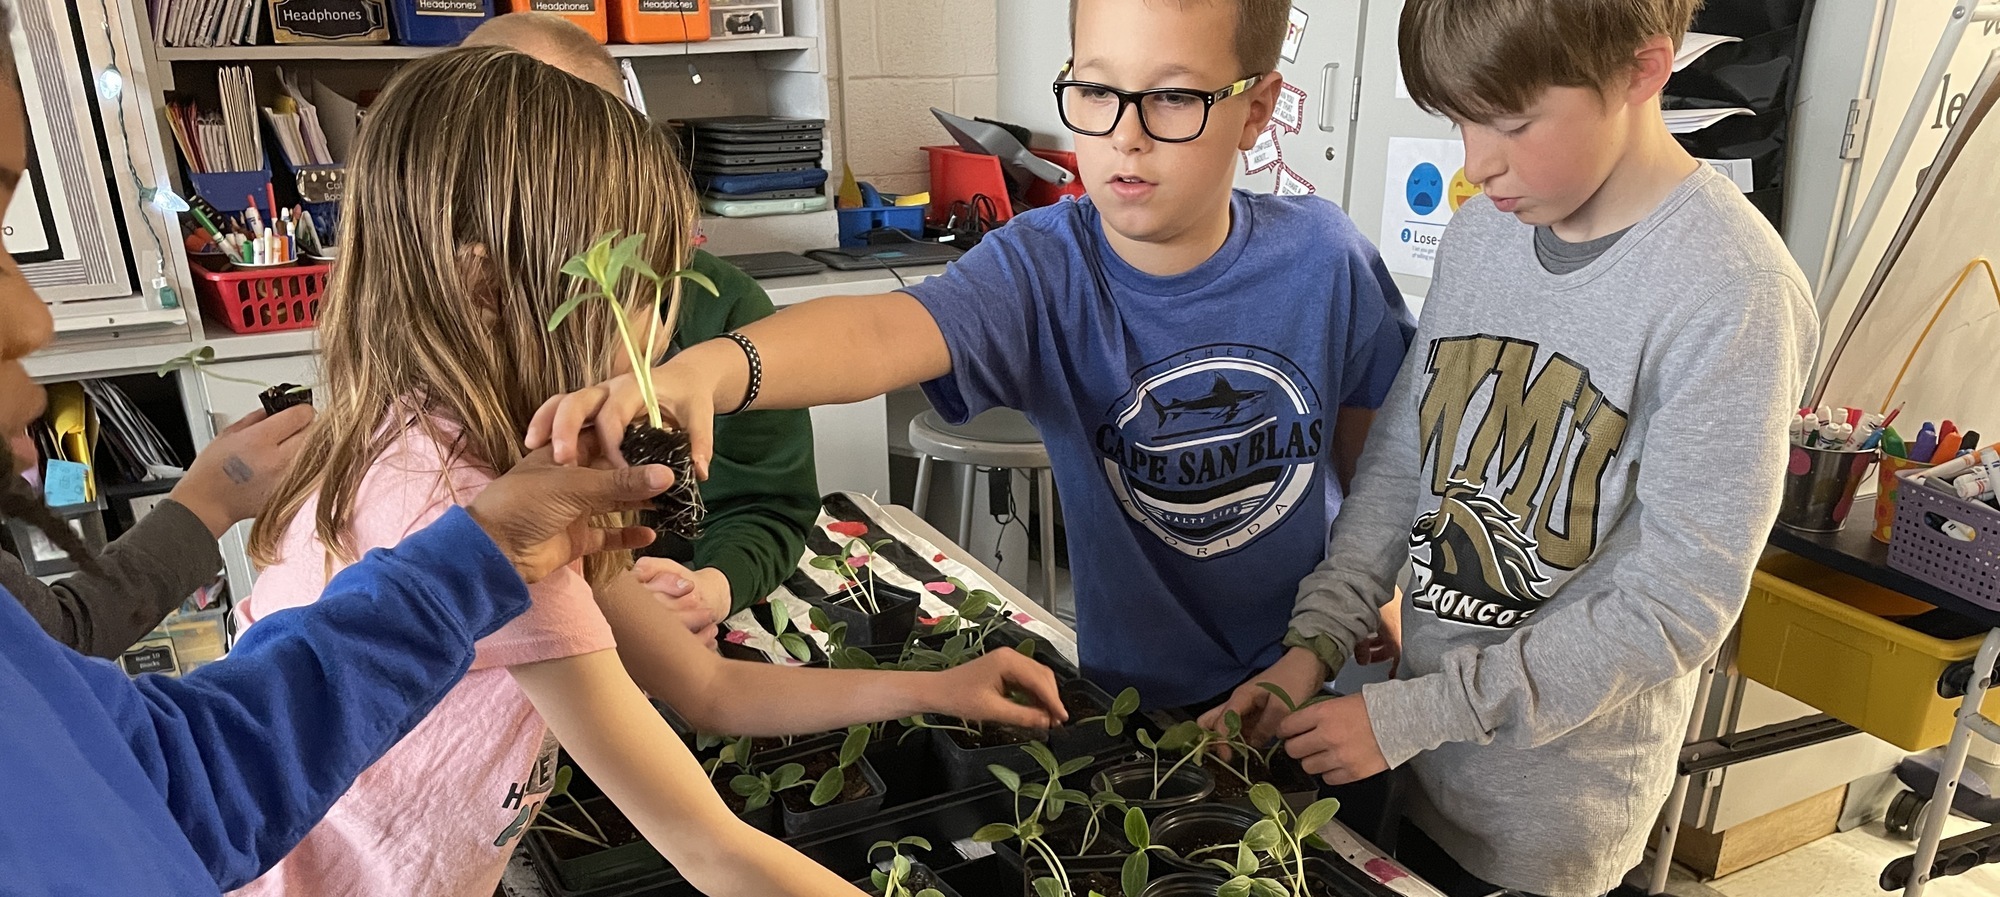 Students working with plants